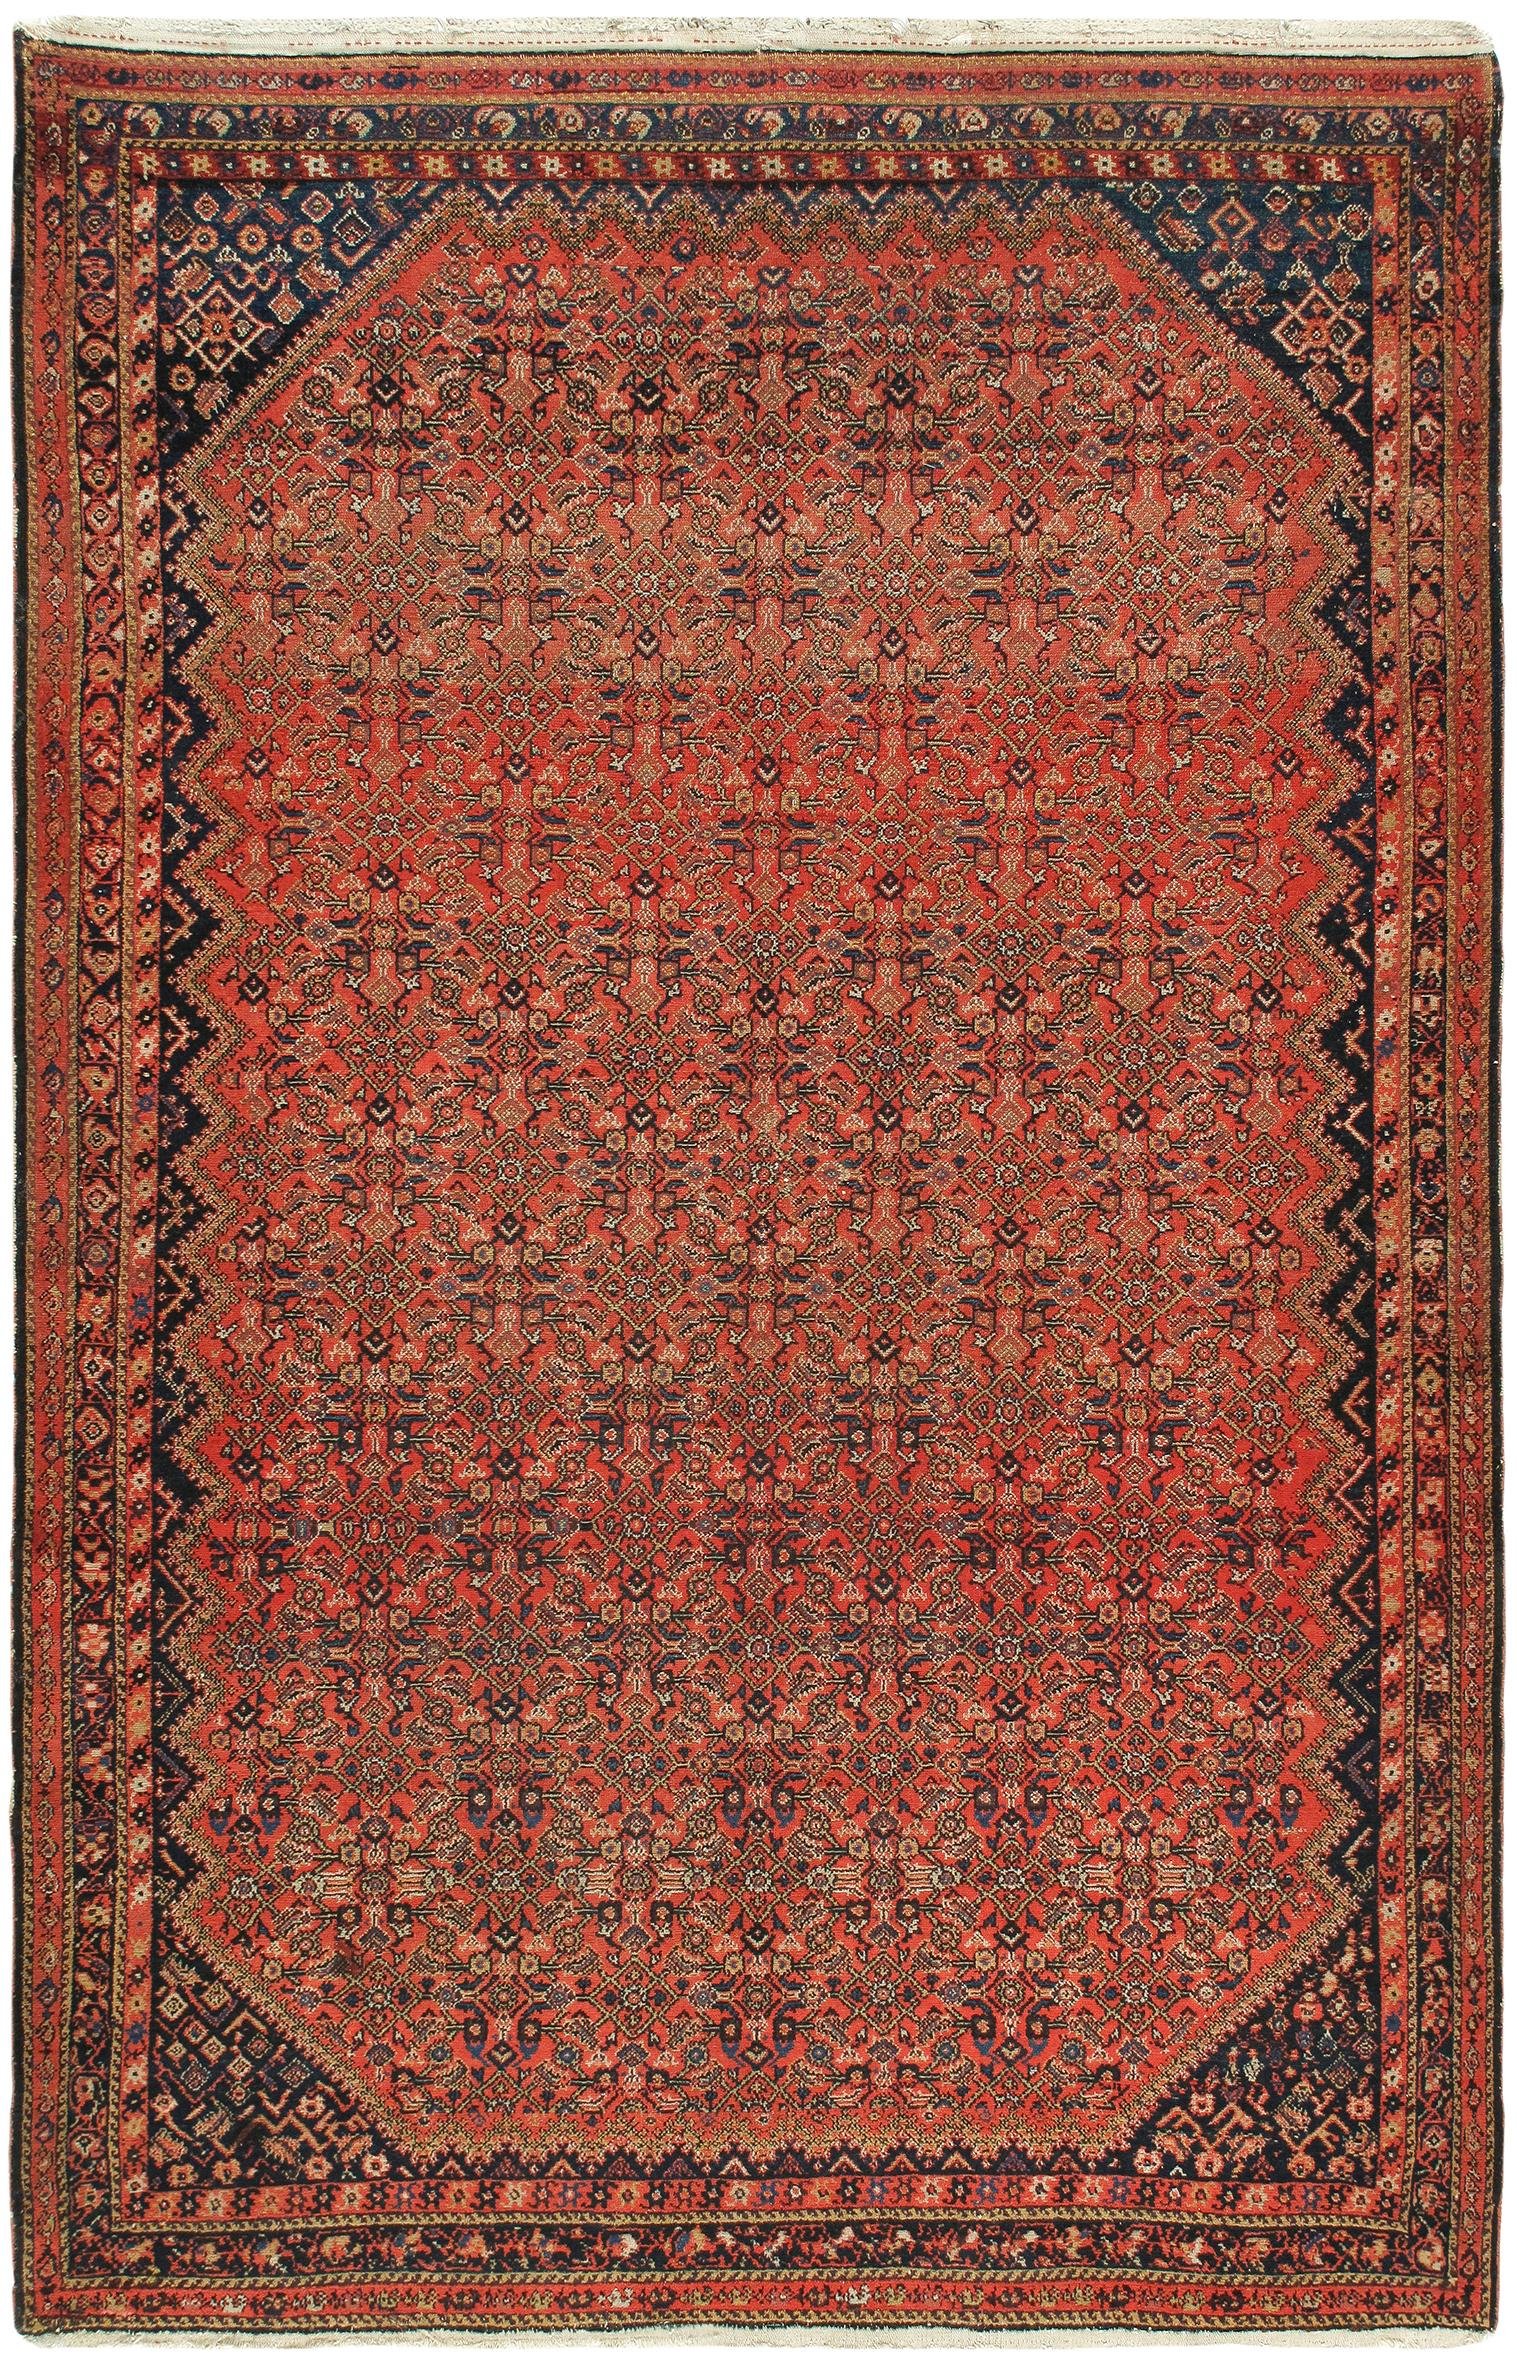 Antique Malayer Rug with a Geometric Herati Fish Design  For Sale